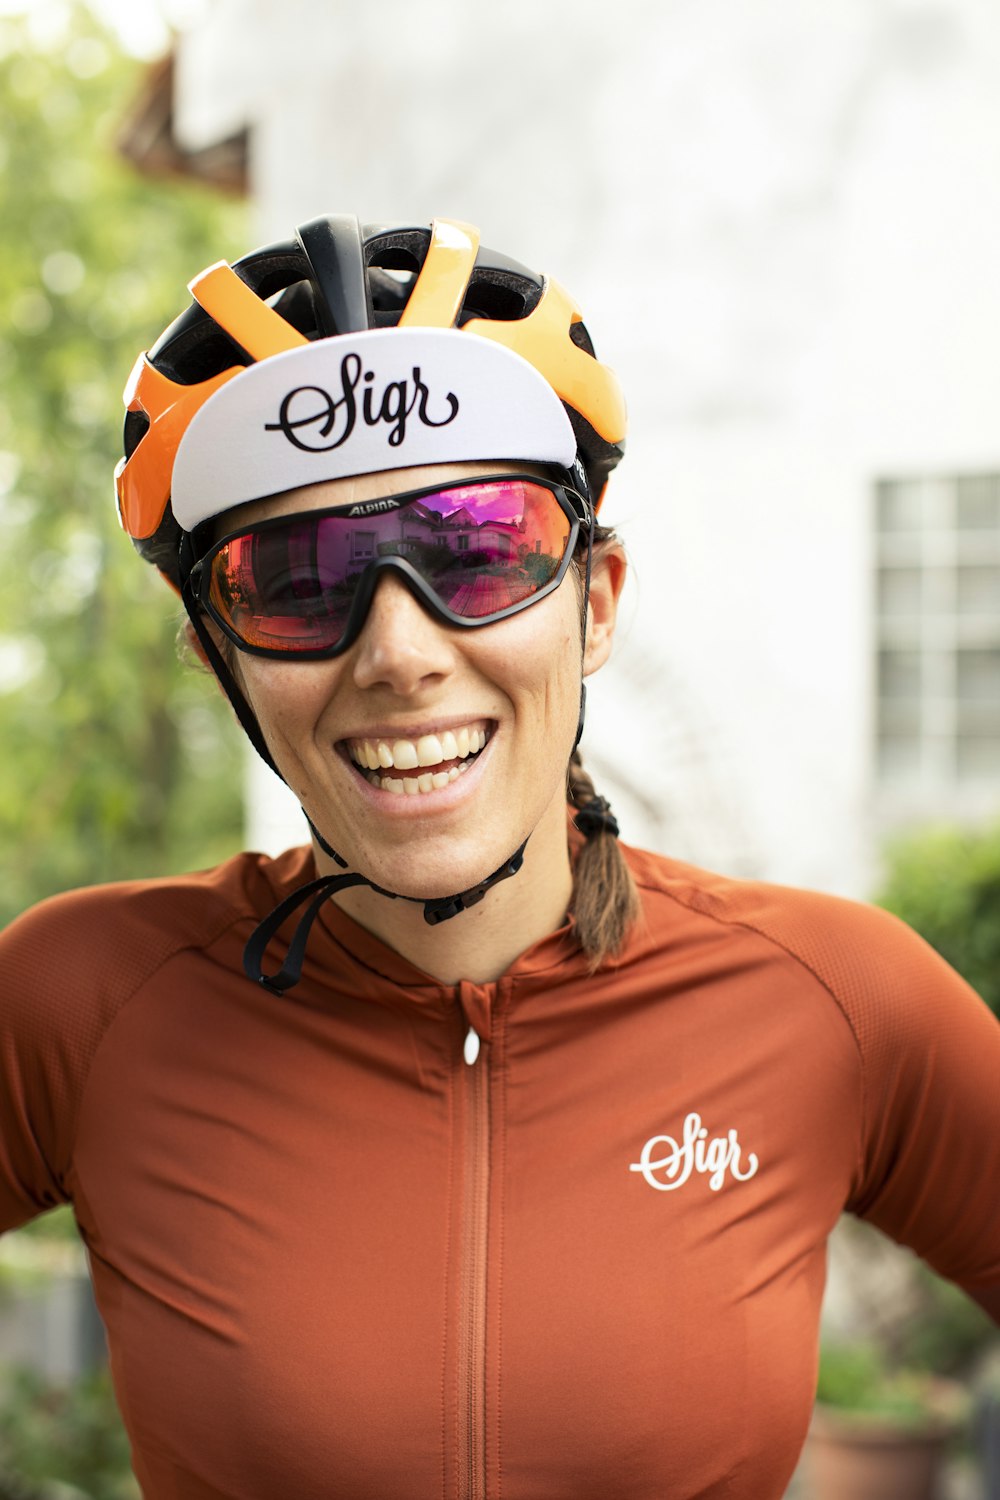 a person wearing a helmet and sunglasses